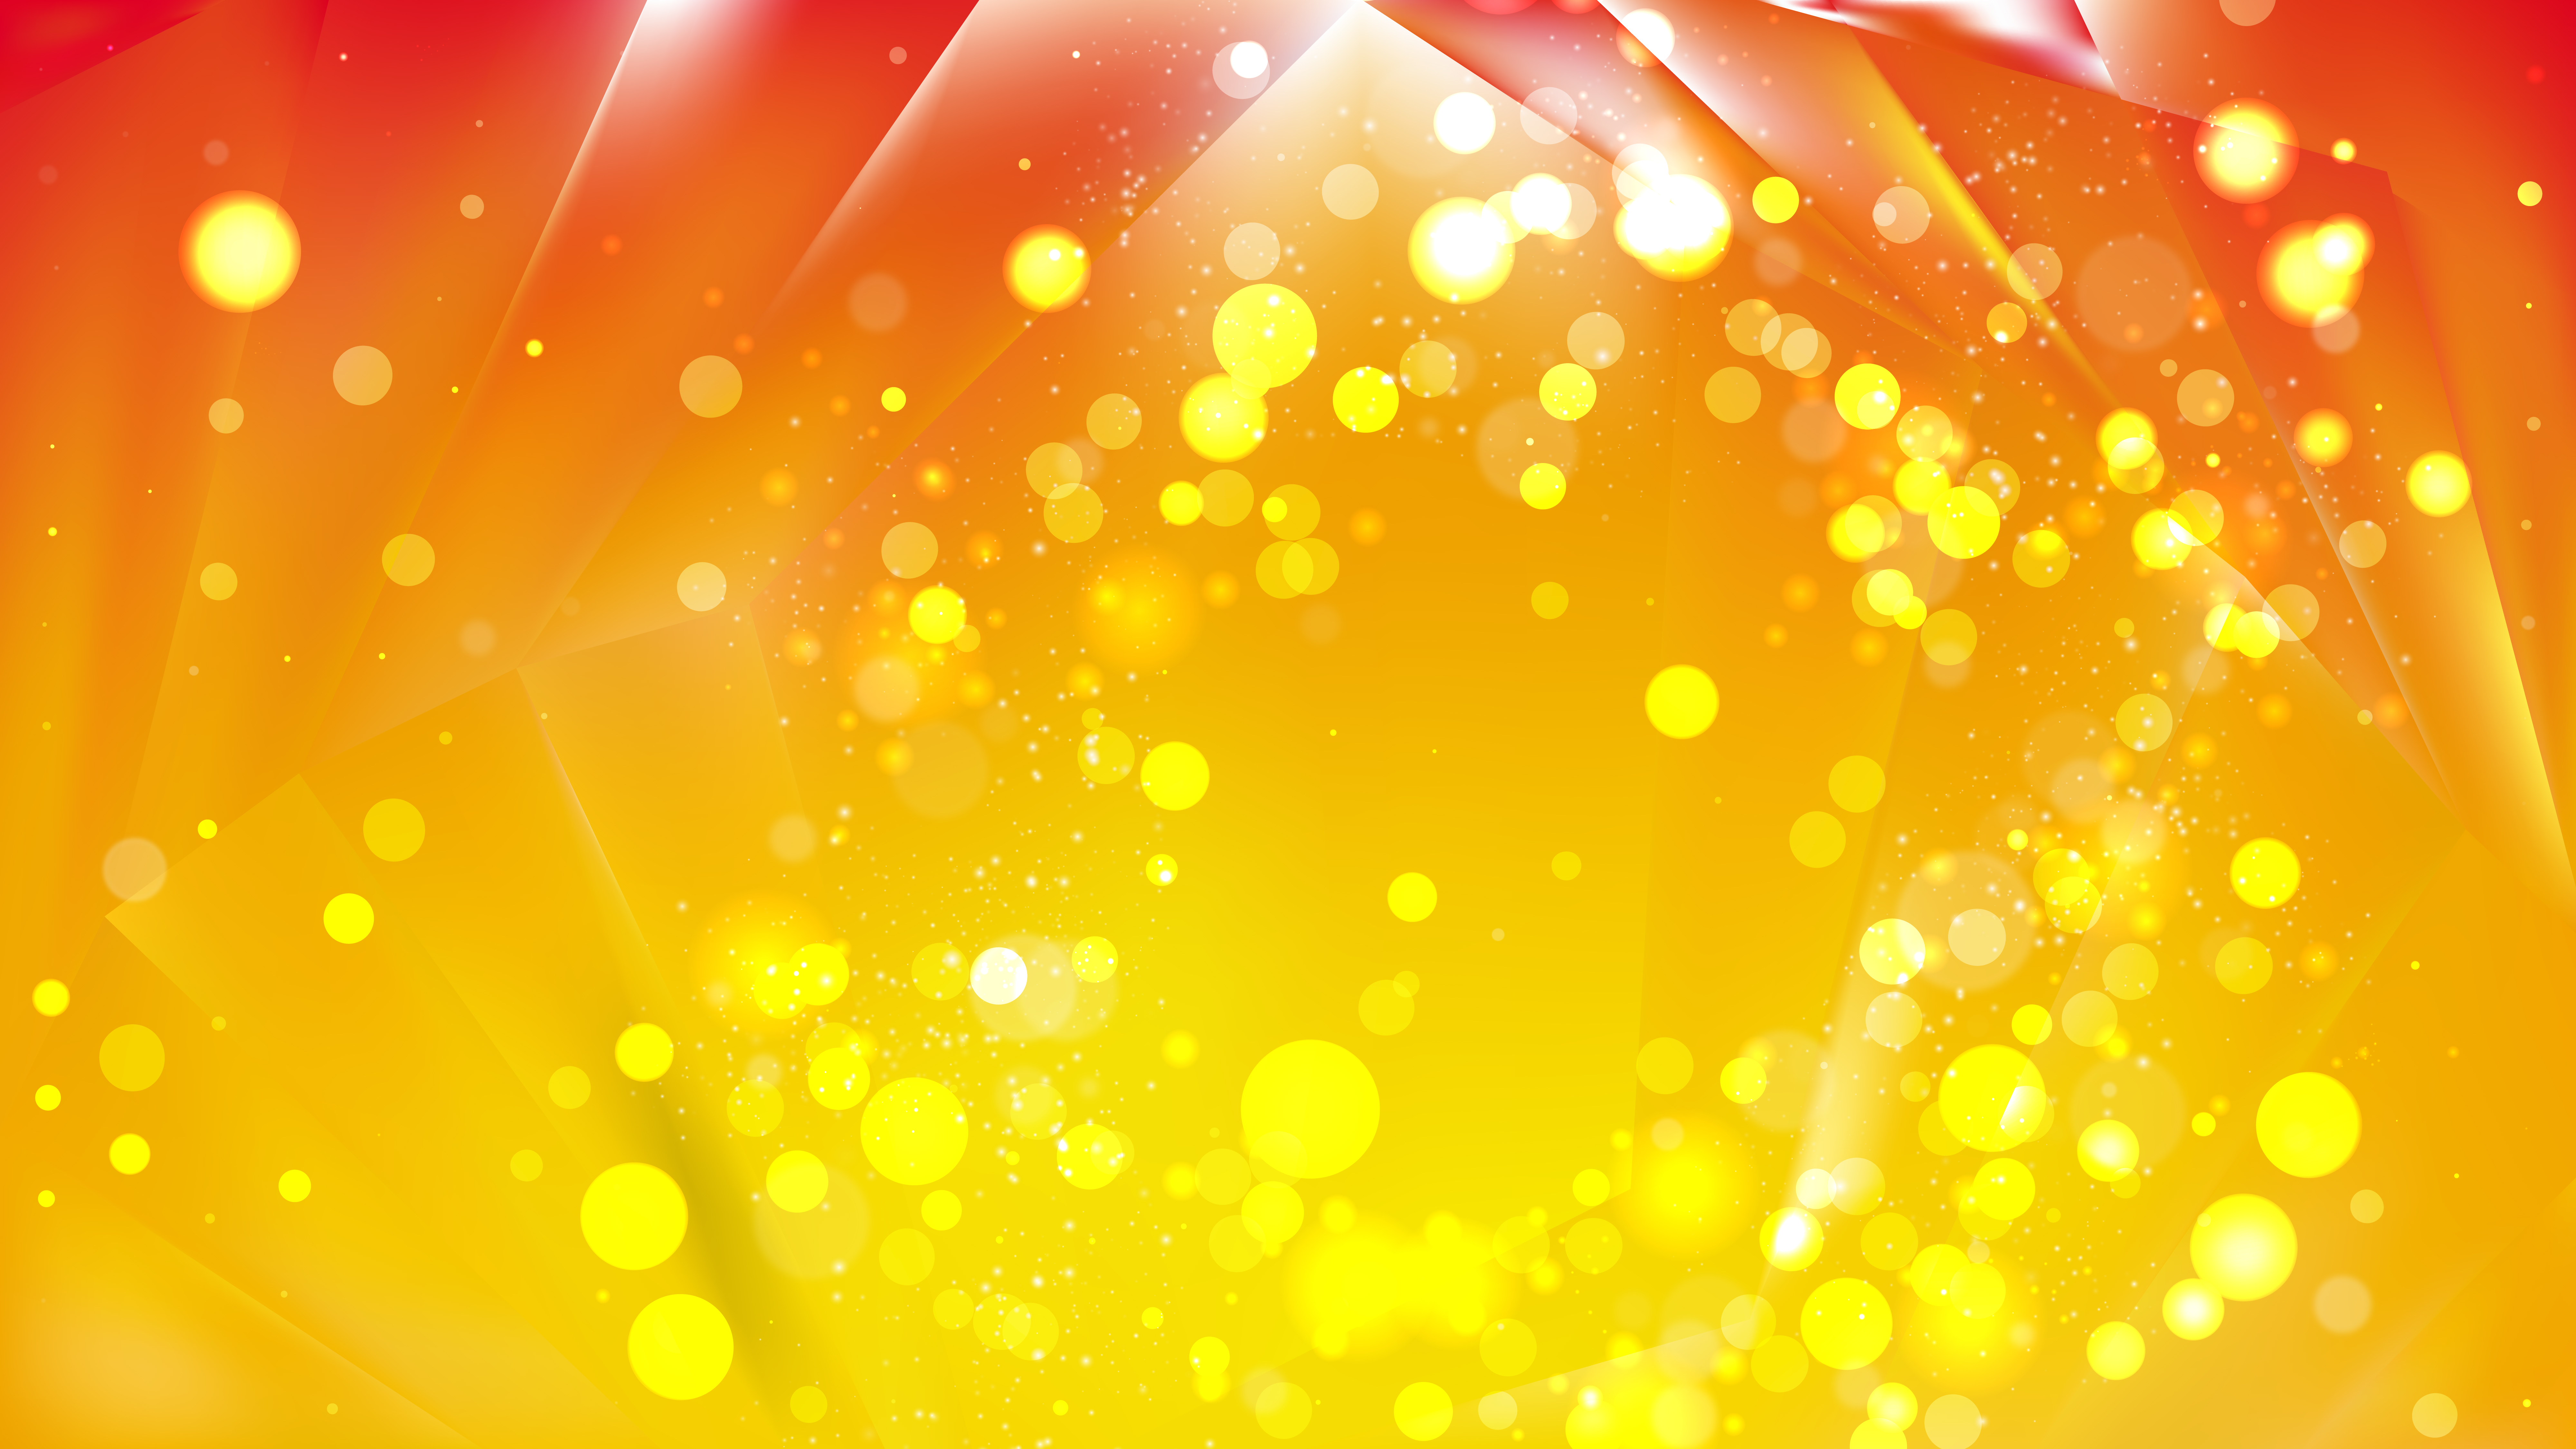 Free Abstract Red and Yellow Blur Lights Background Vector